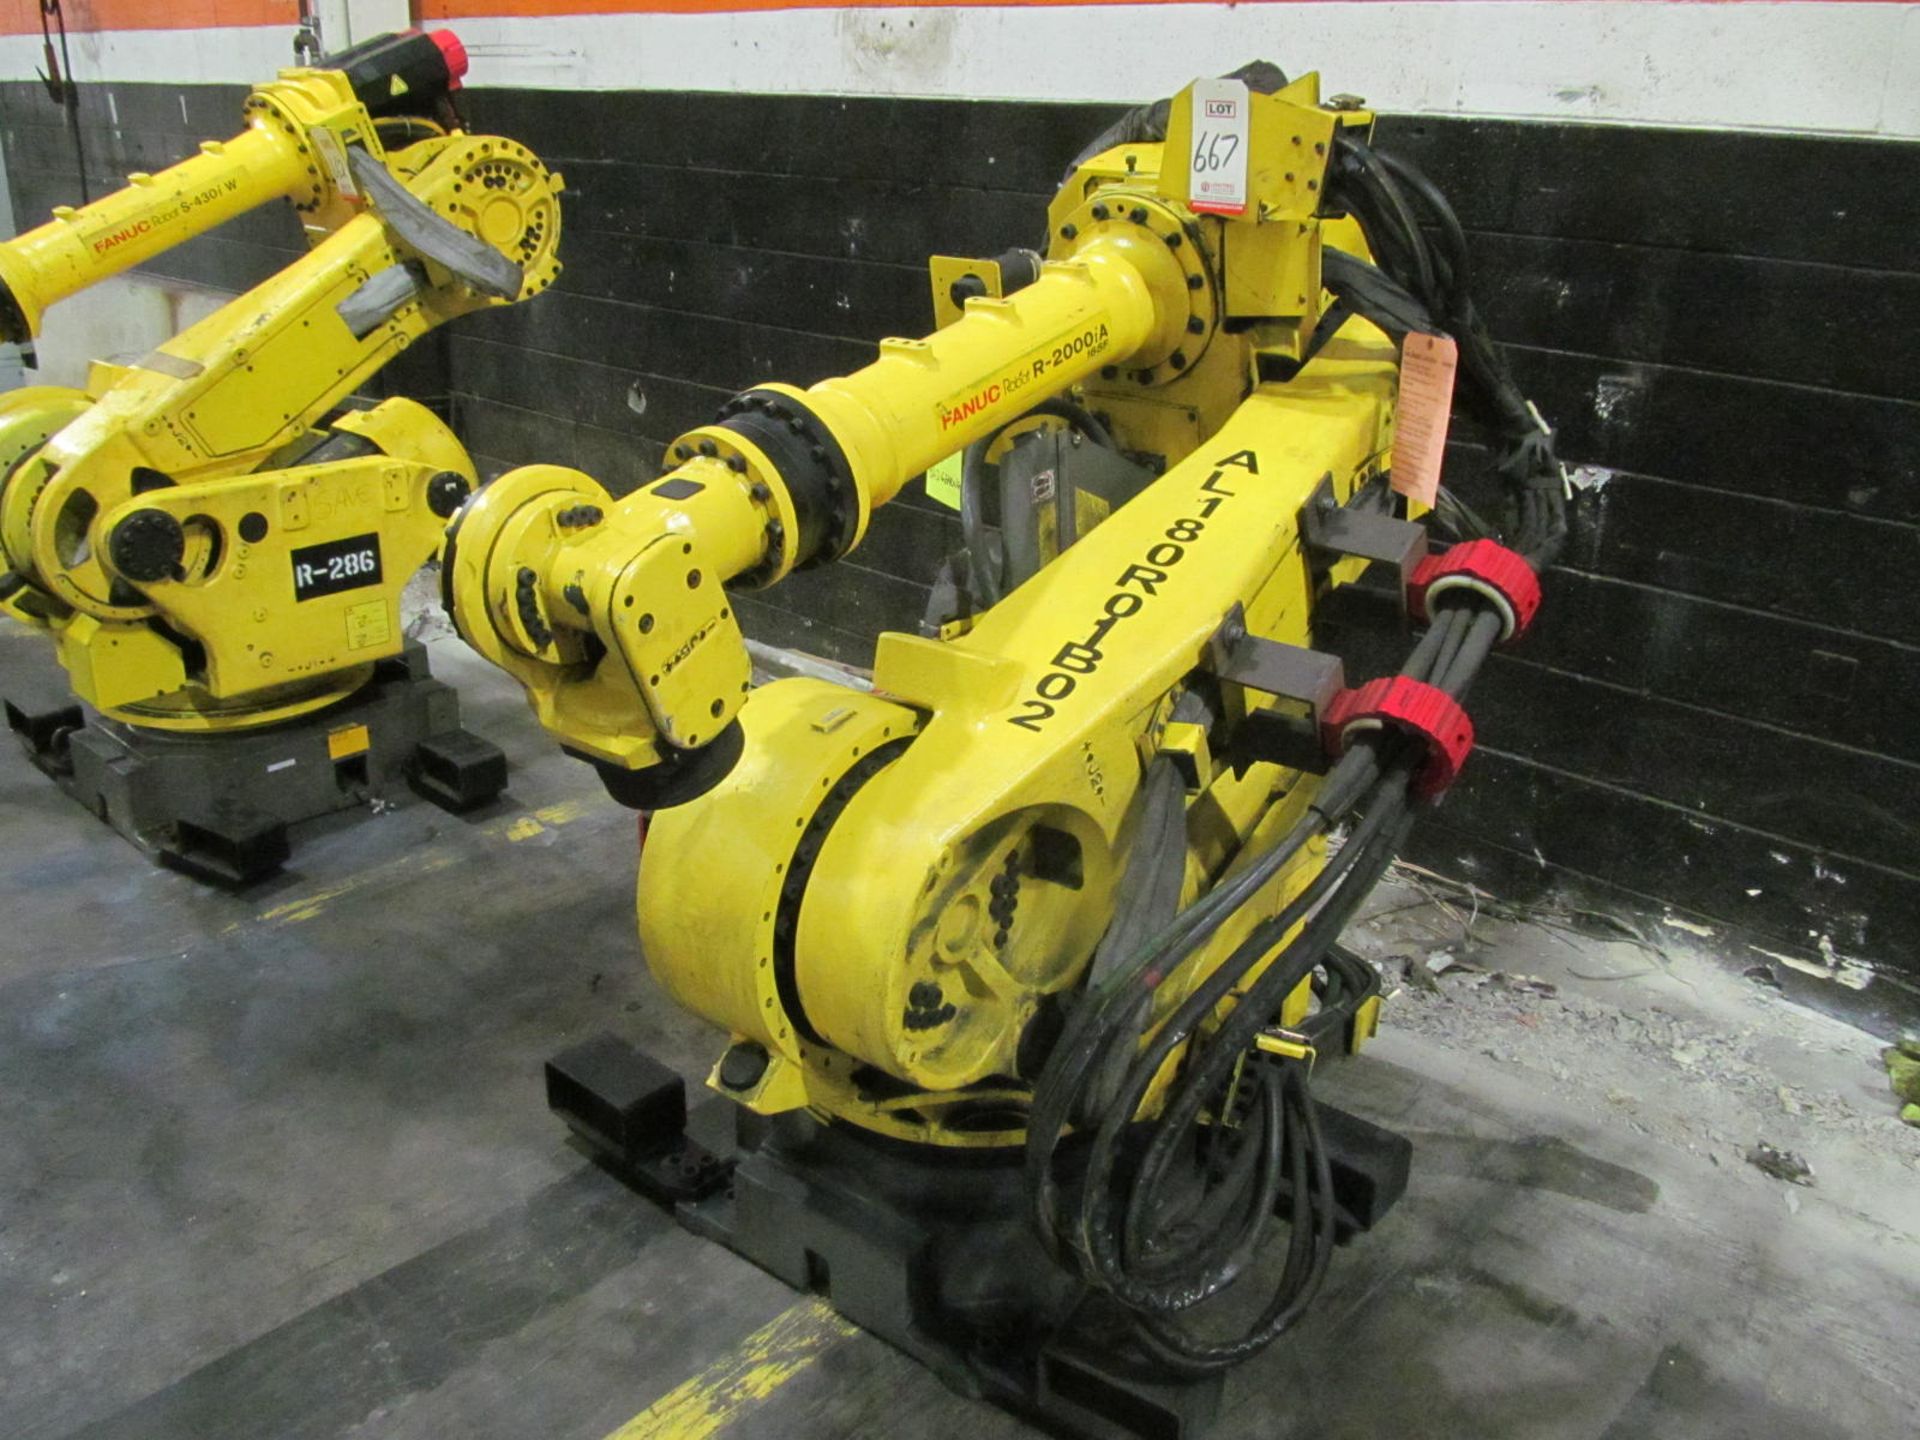 6-AXIS FANUC R-2000iA 165F ROBOT, S/N R03406676 (2003), TYPE A05B-1324-B203, F-57465 (LOC.-P23) - Image 2 of 2